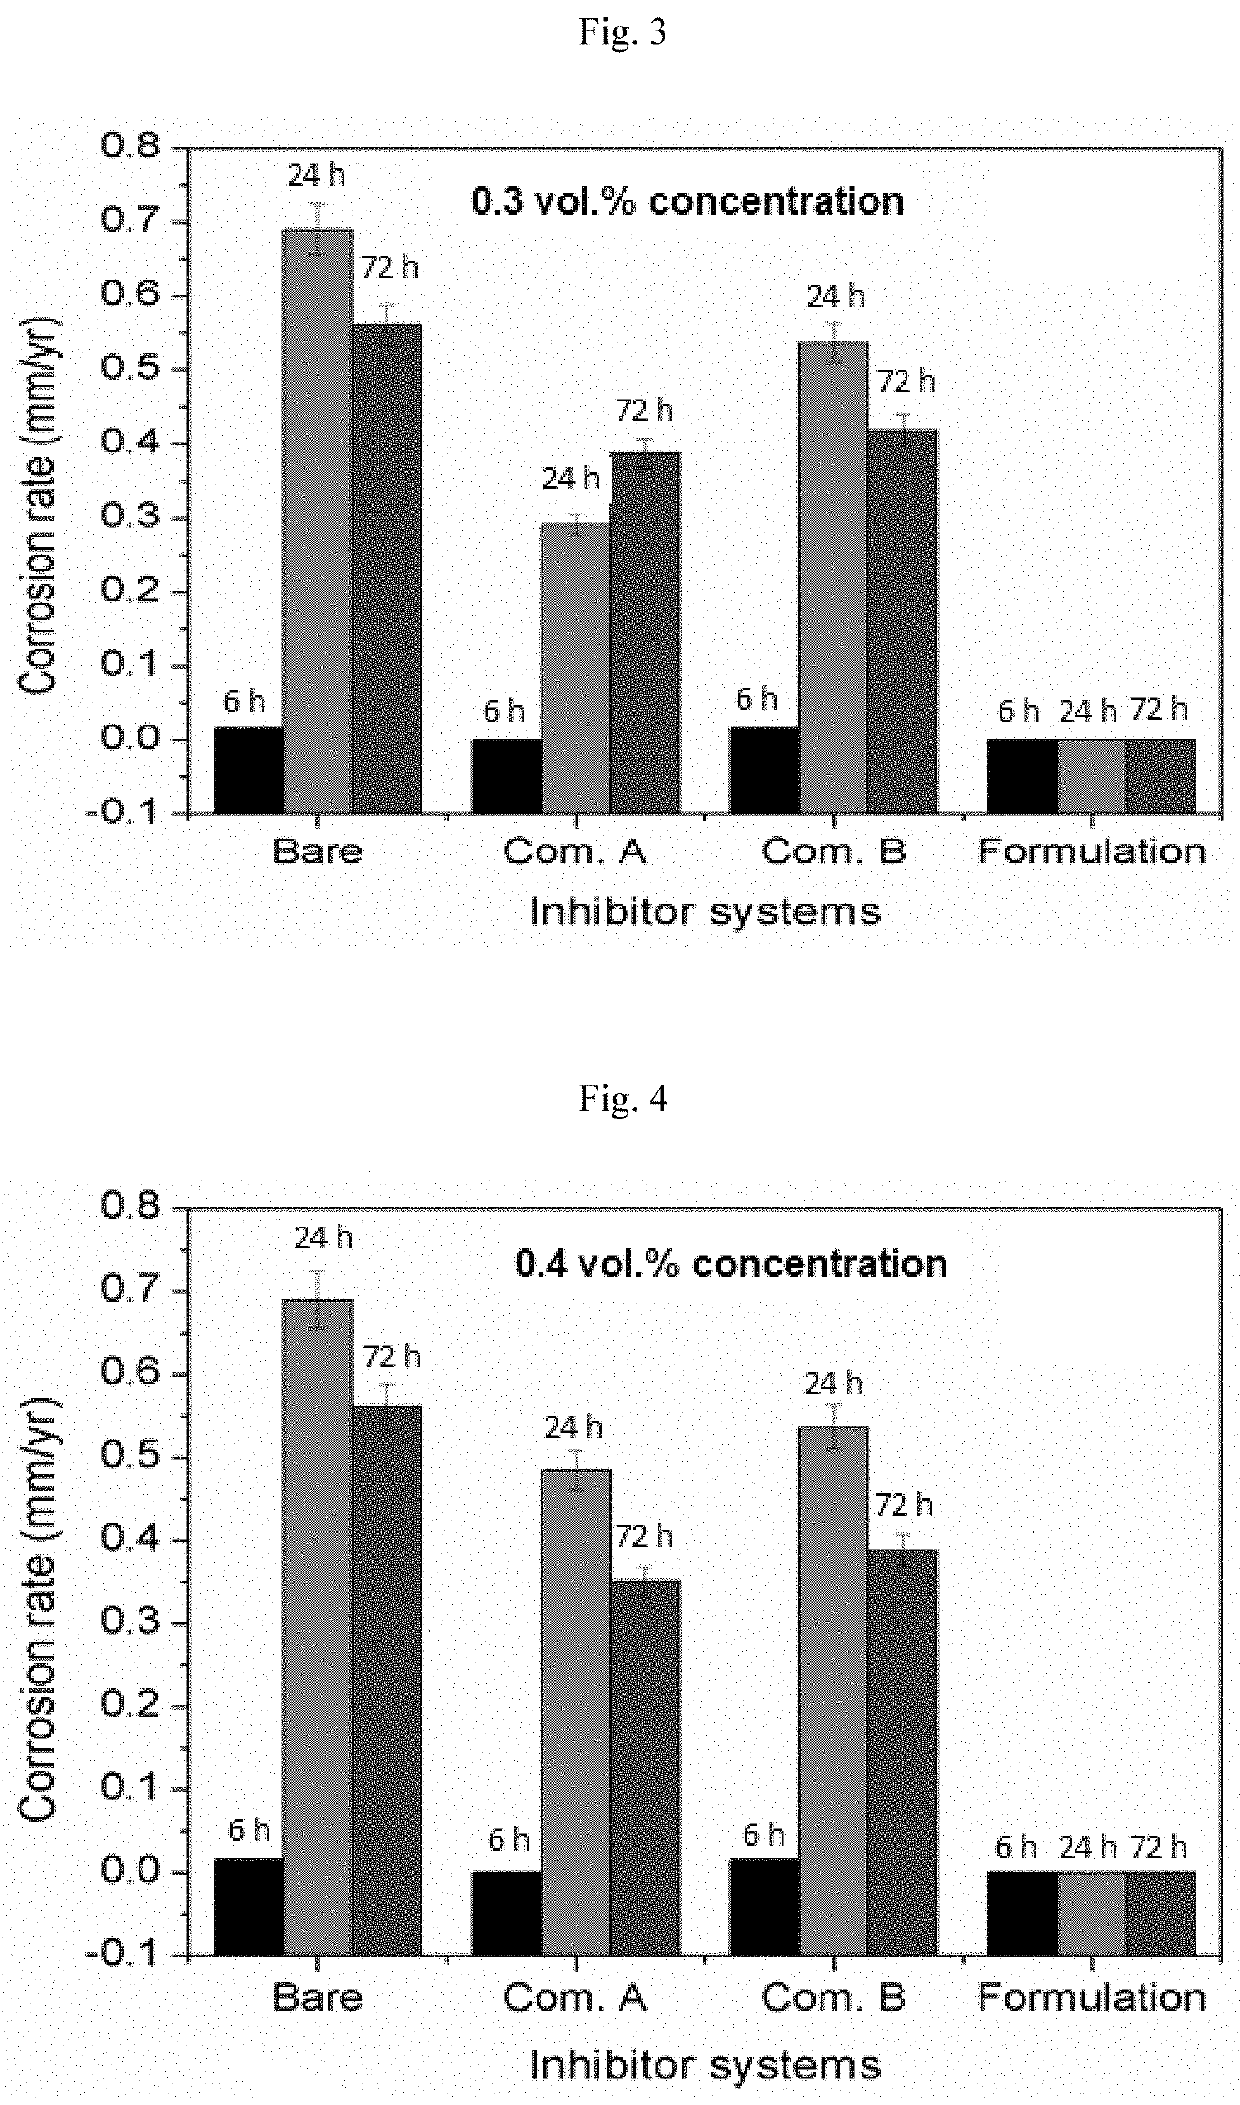 Corrosion inhibitor composition and methods of inhibiting corrosion during acid pickling